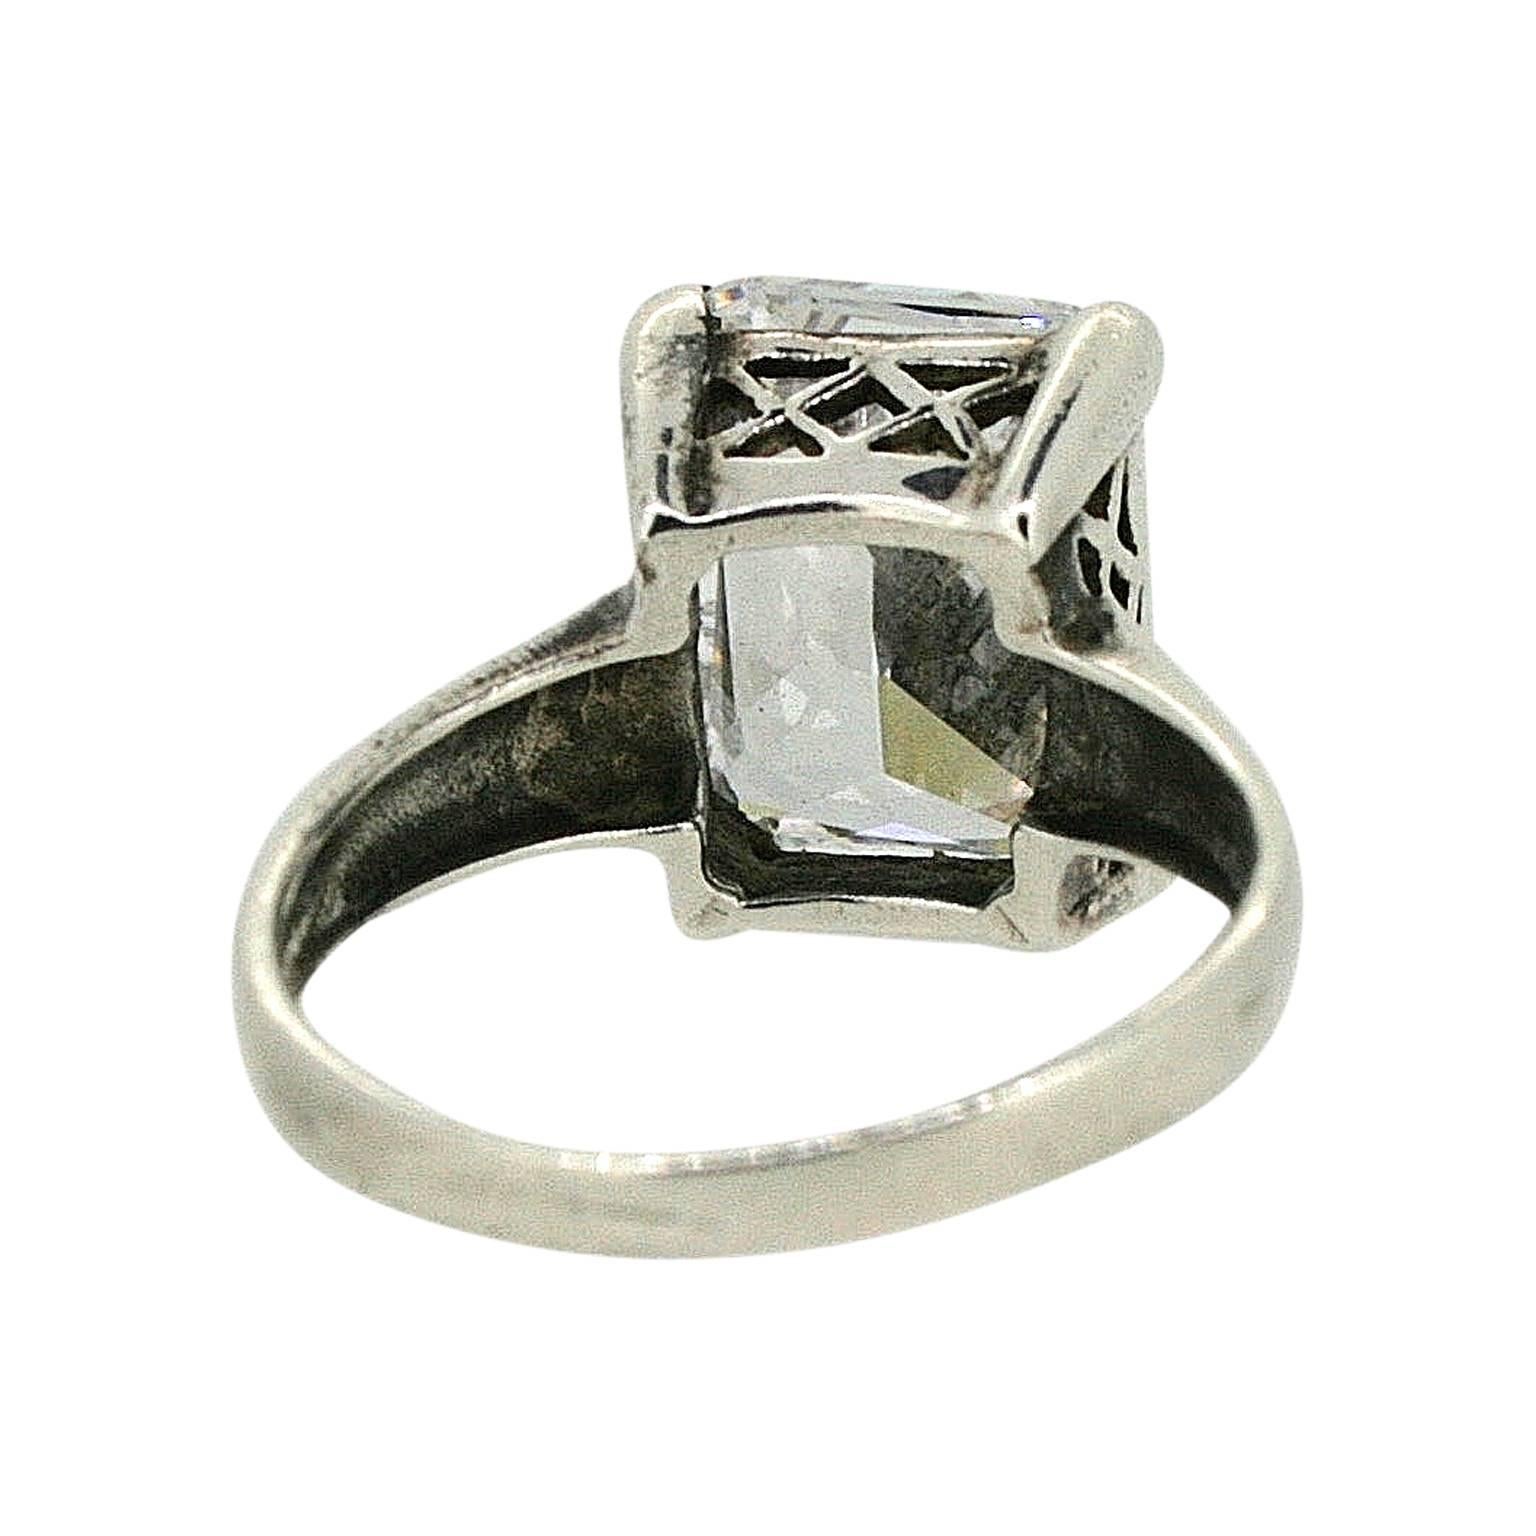 Women's 1930s Art Deco Solitaire Clear Rhinestone Vintage Ring